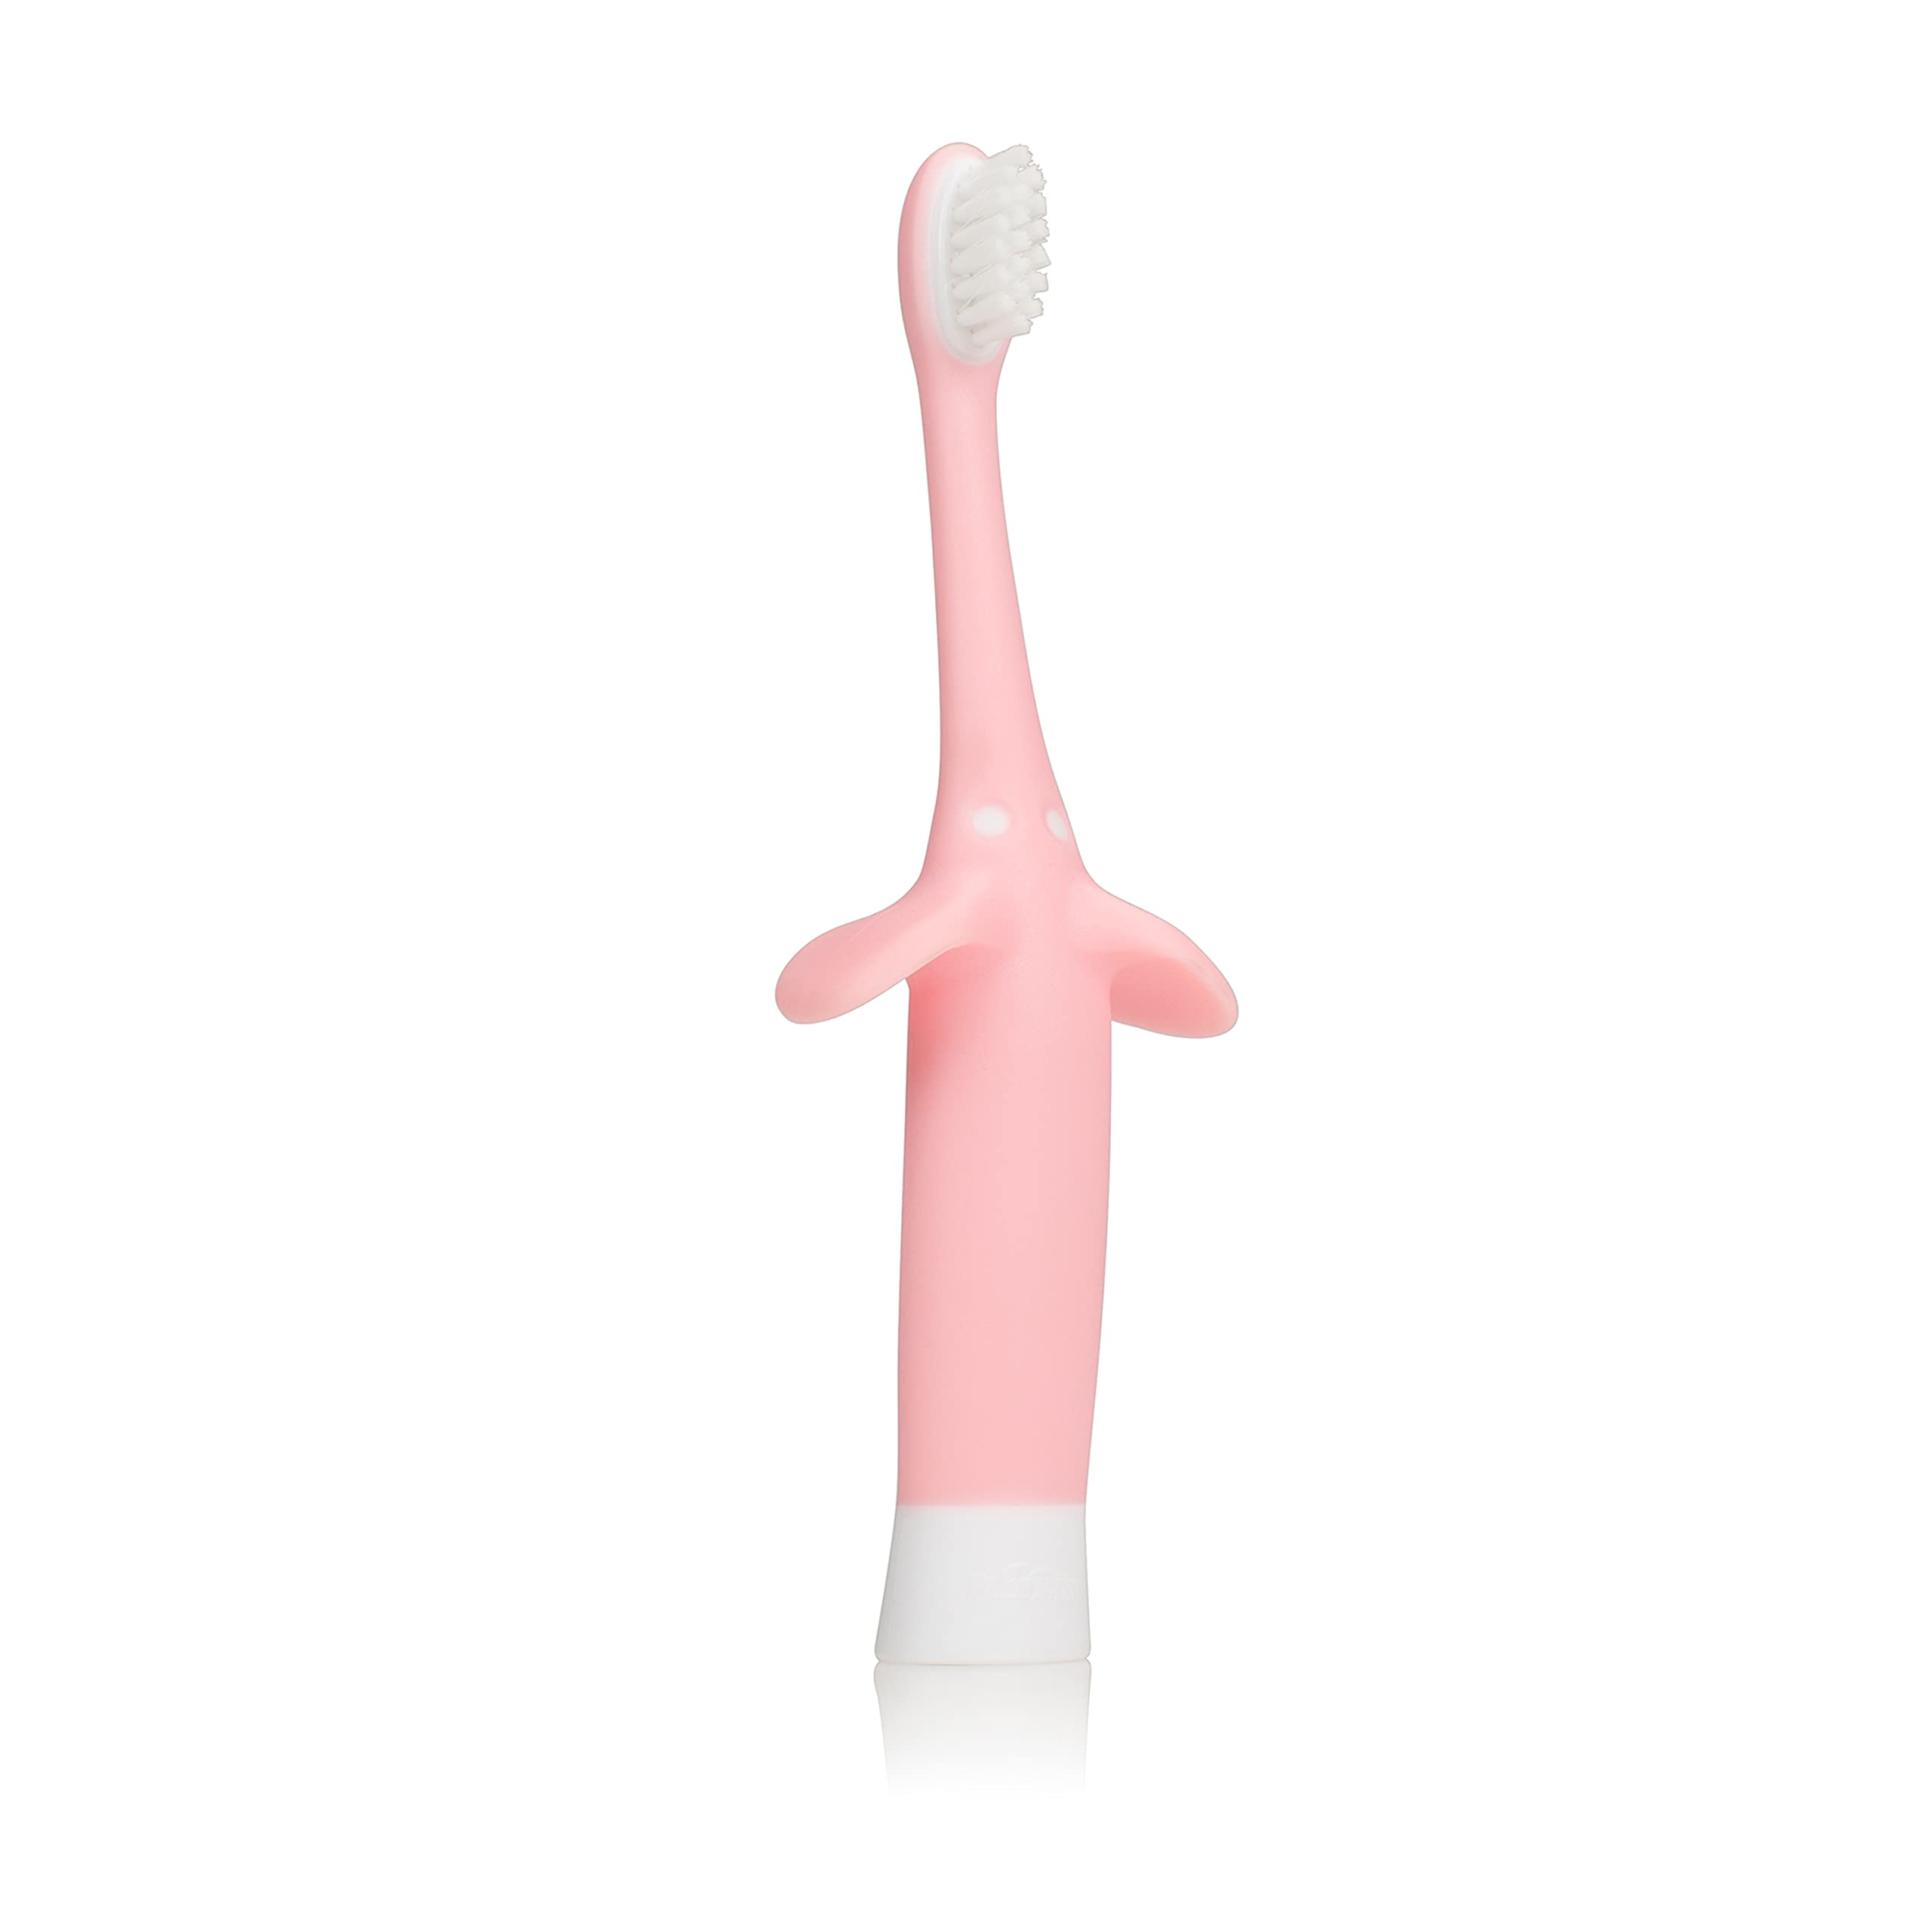 Dr. Brown’s Infant-to-Toddler Toothbrush, Elephant, Pink, 0-3 years